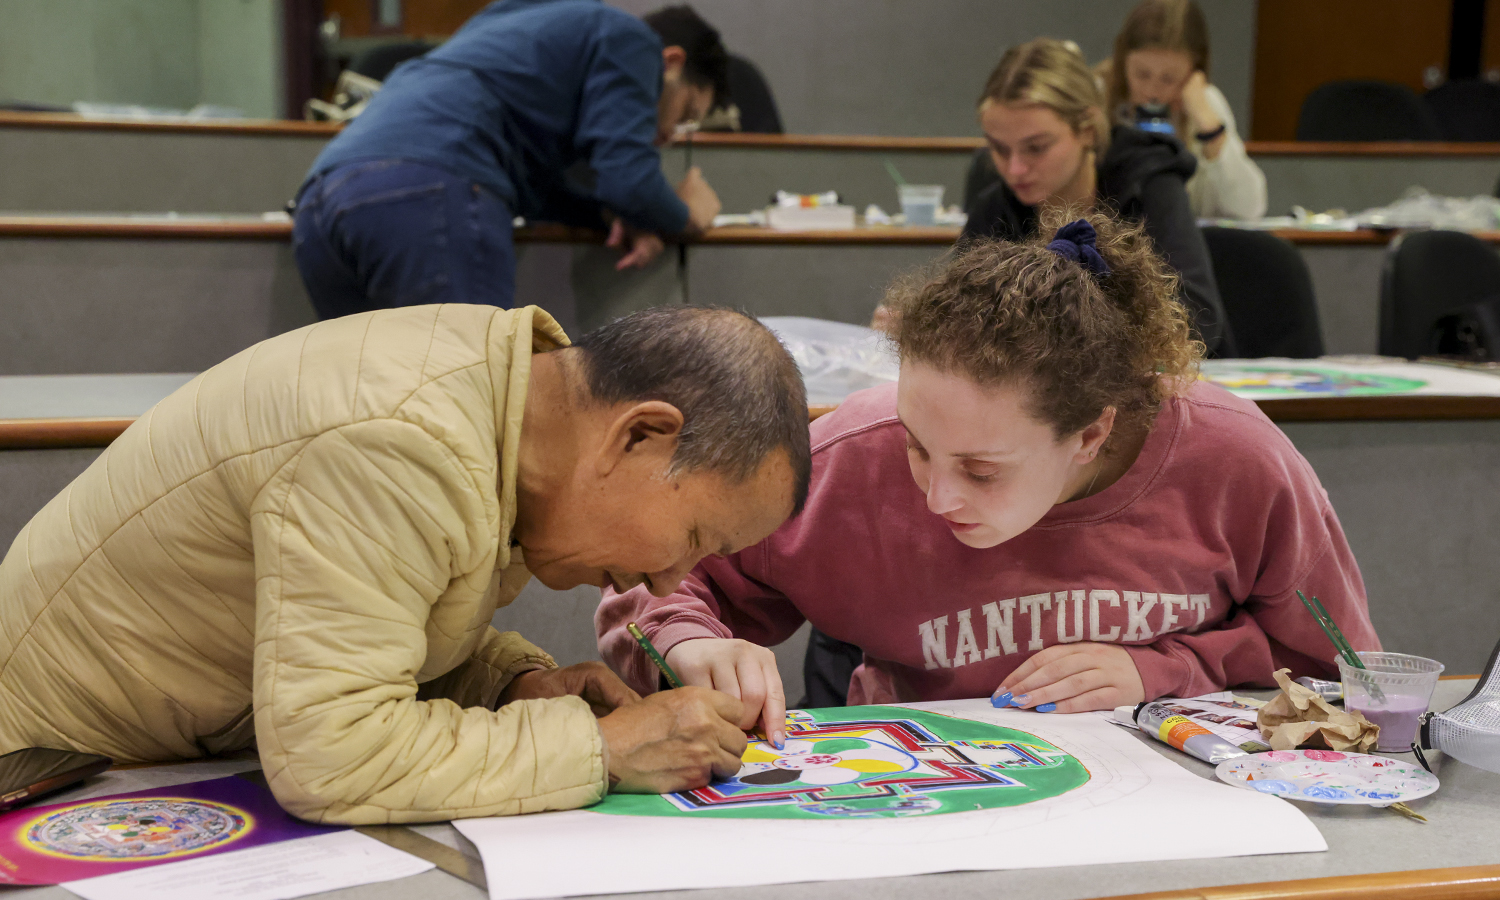 The Venerable Tenzin Yignyen, an instructor of Asian Studies and a monk in the Dalai Lama’s personal monastery, works with Jamie Fine ’24 on her assignment during “Tibetan Mandala Painting” class.